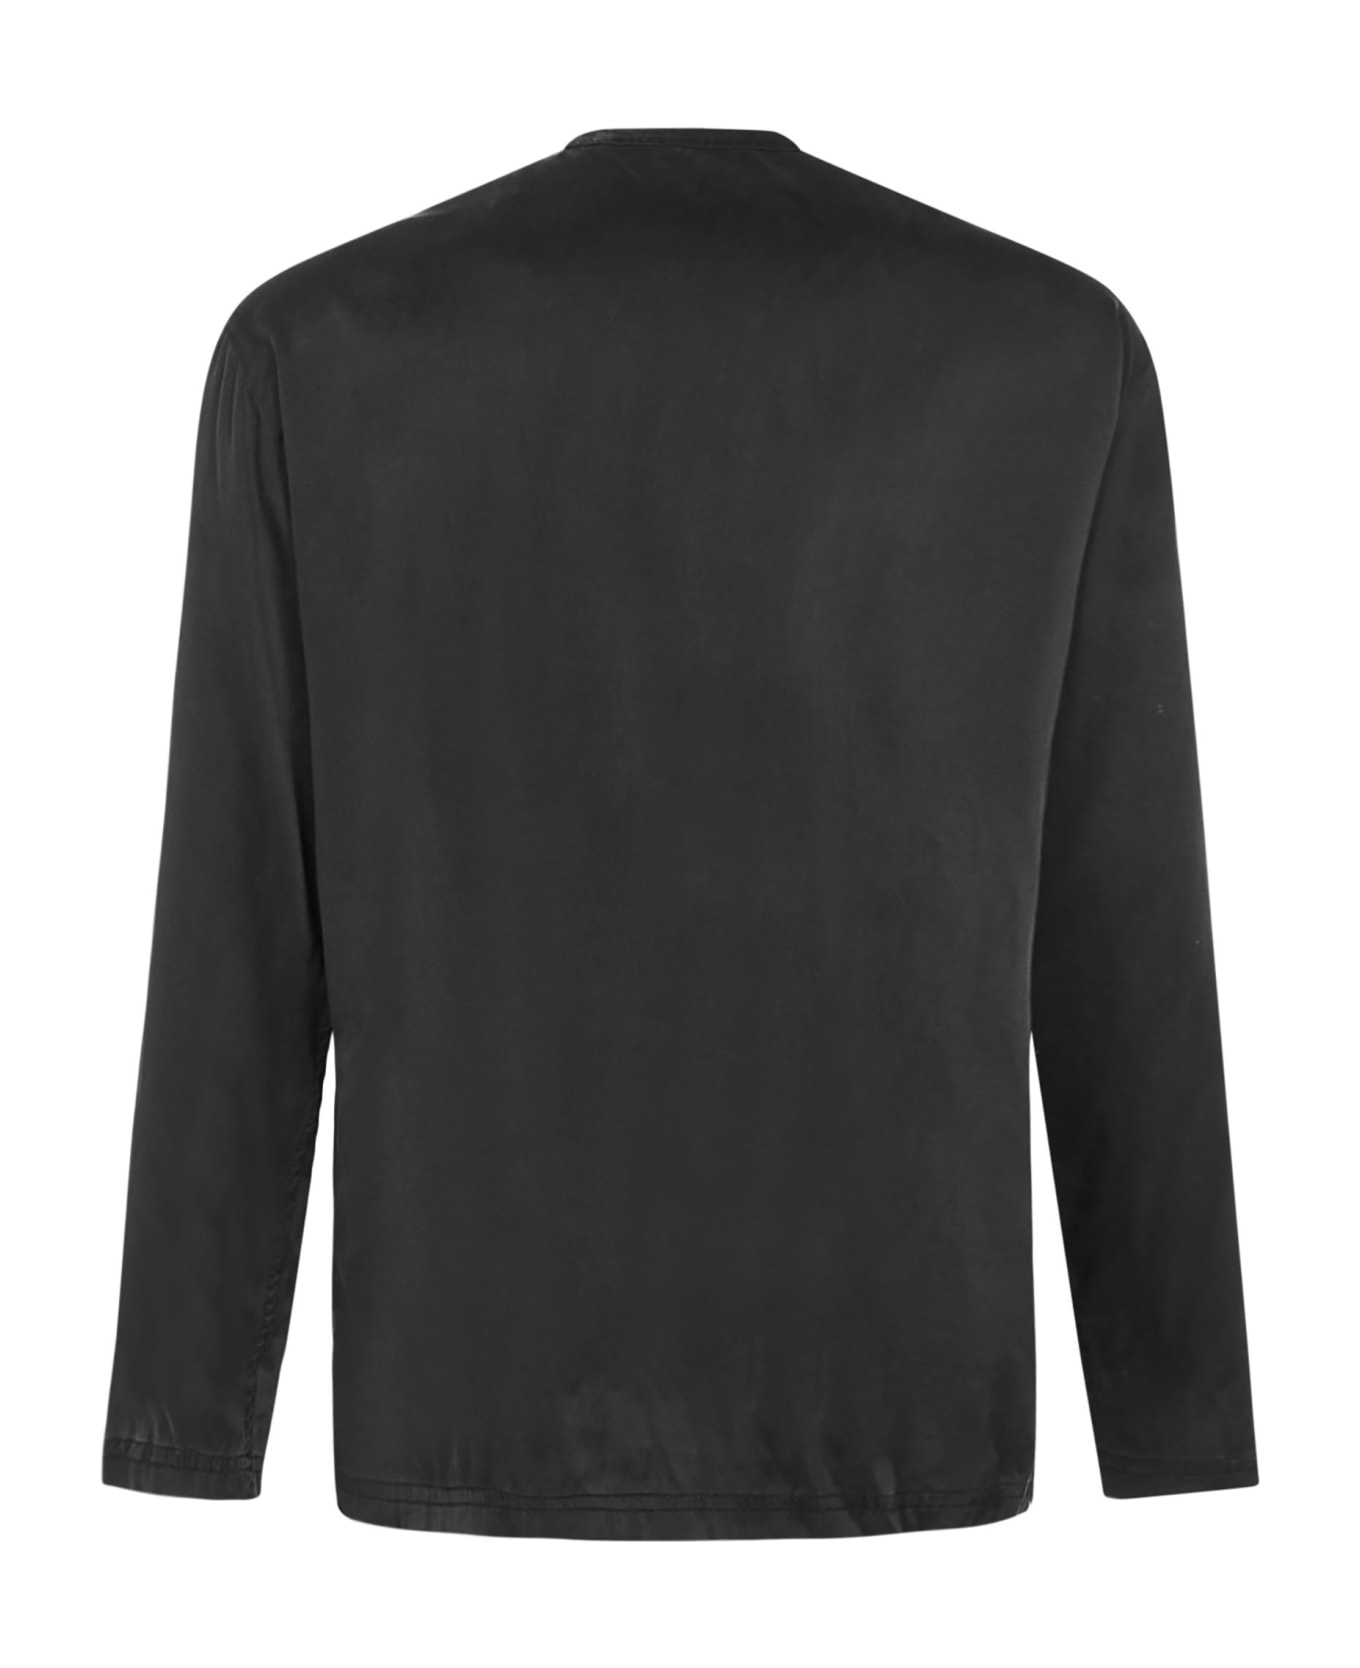 Tom Ford Henley Pajama - Black パジャマ